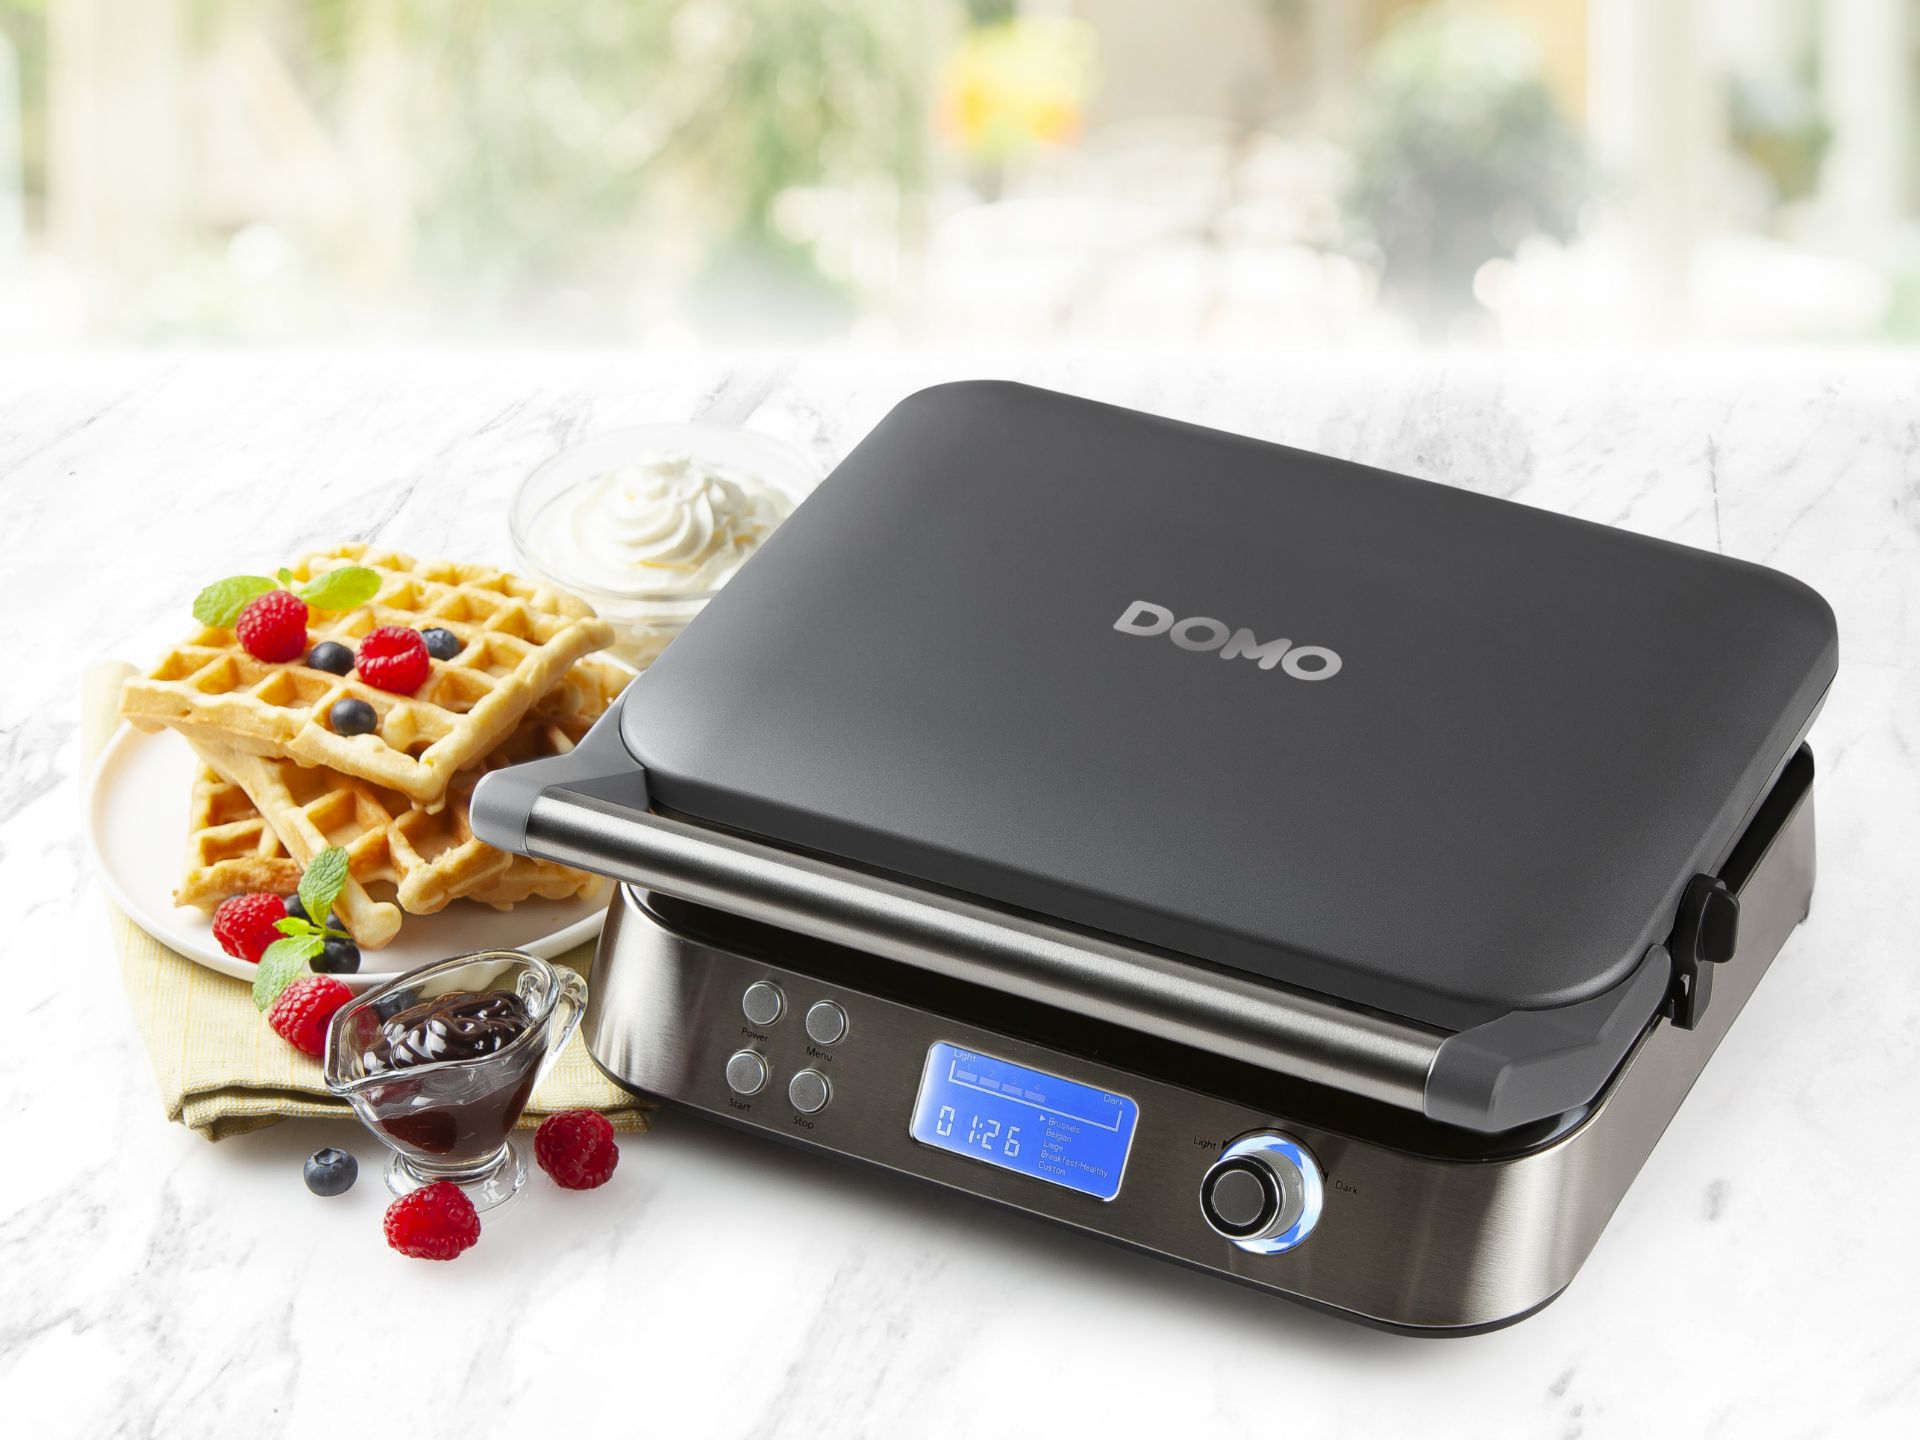 3 x DOMO Belgian Waffle Makers 1600W RRP £130 each £390 total - Image 4 of 7